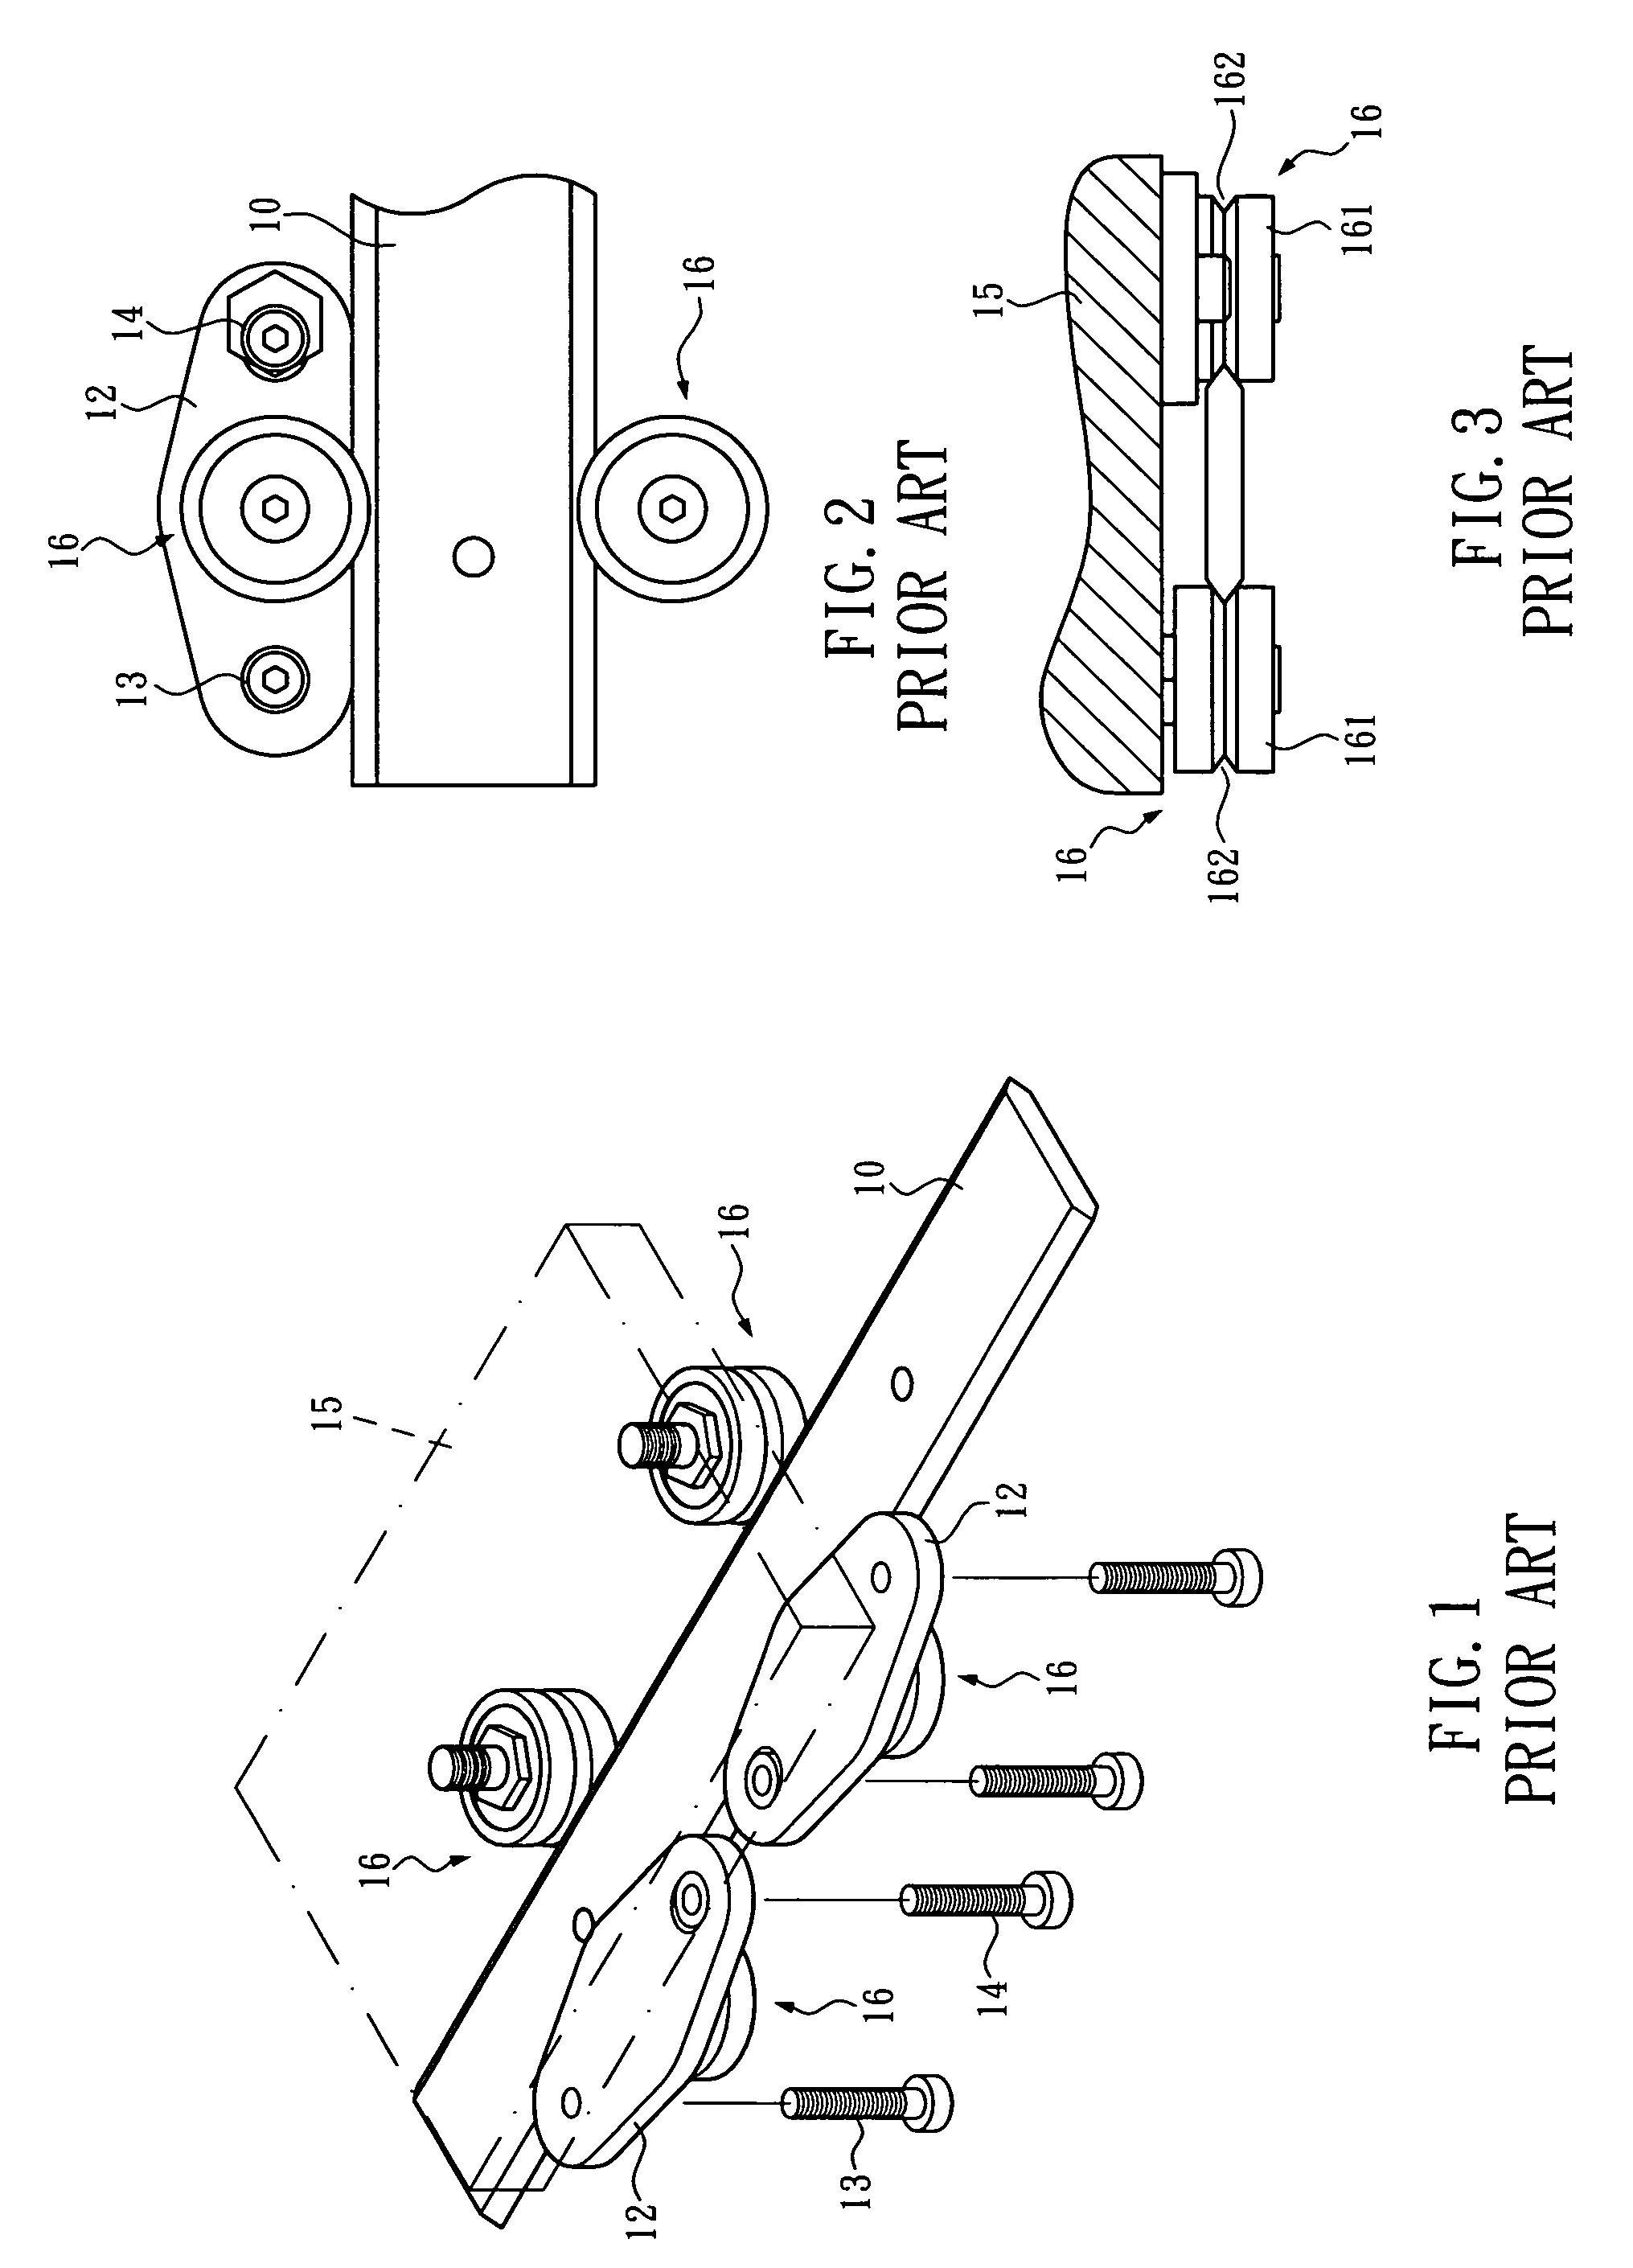 Automatic-positioning linear guide